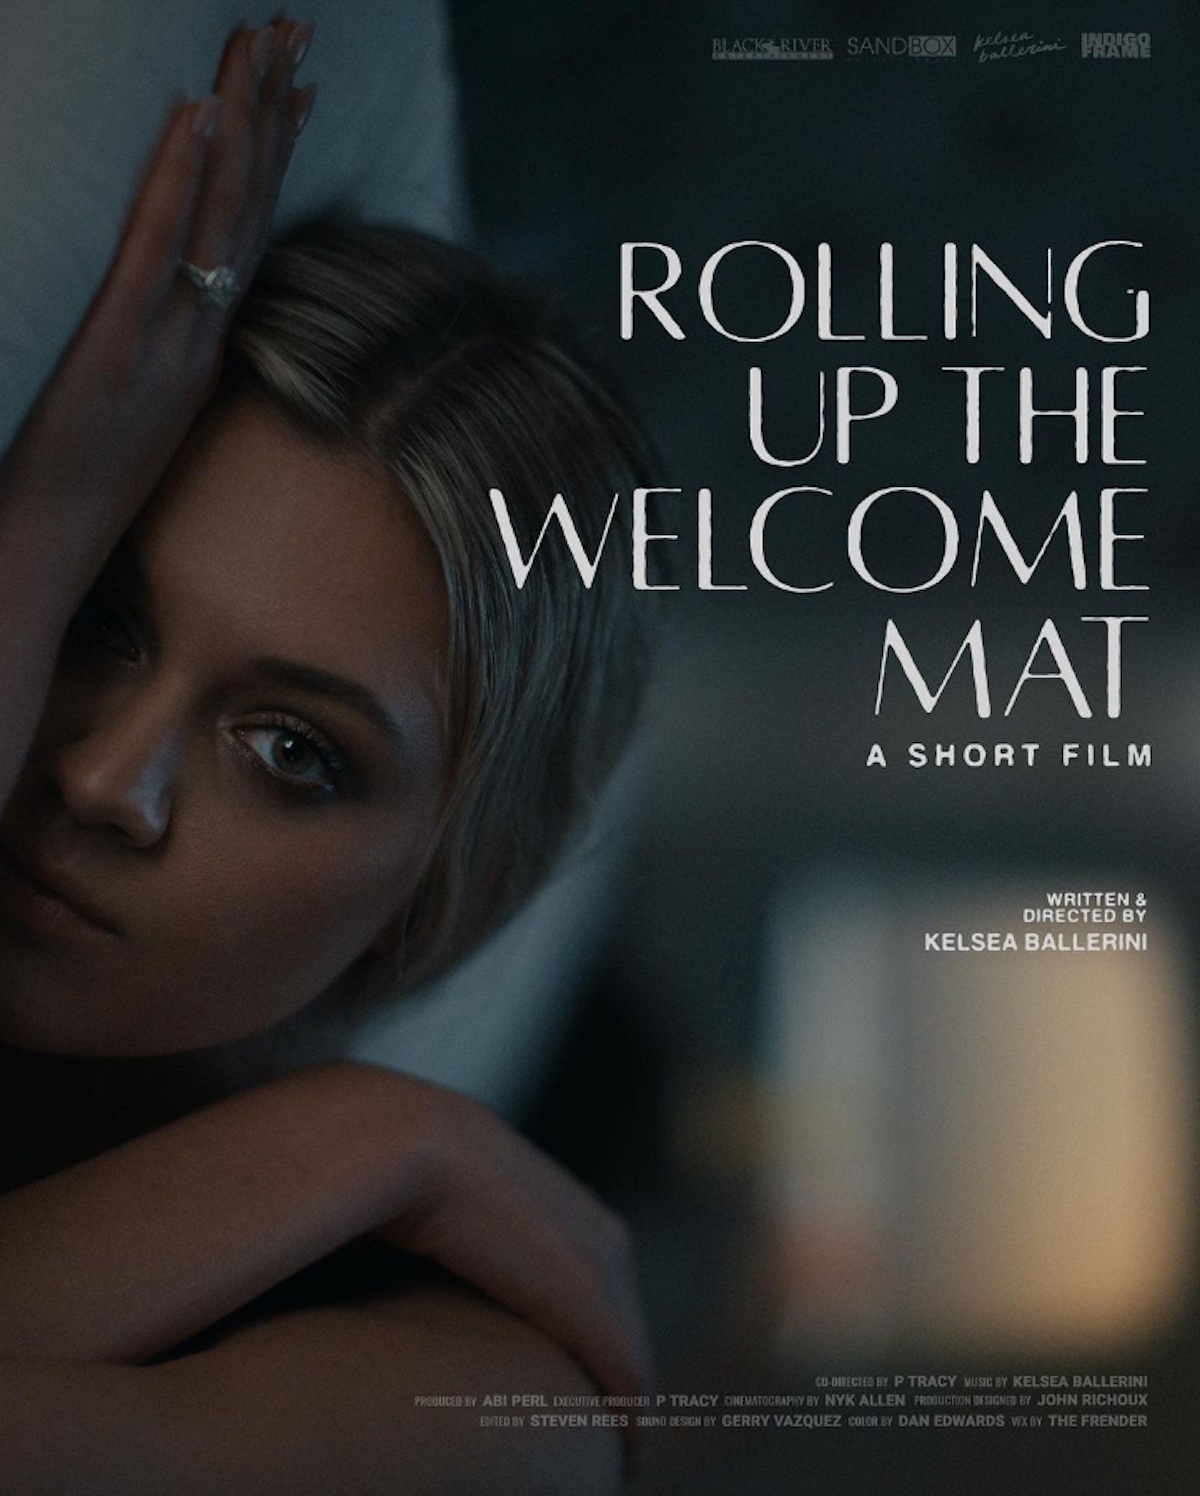 "Rolling Up the Welcome Mat" Kelsea Ballerini film poster